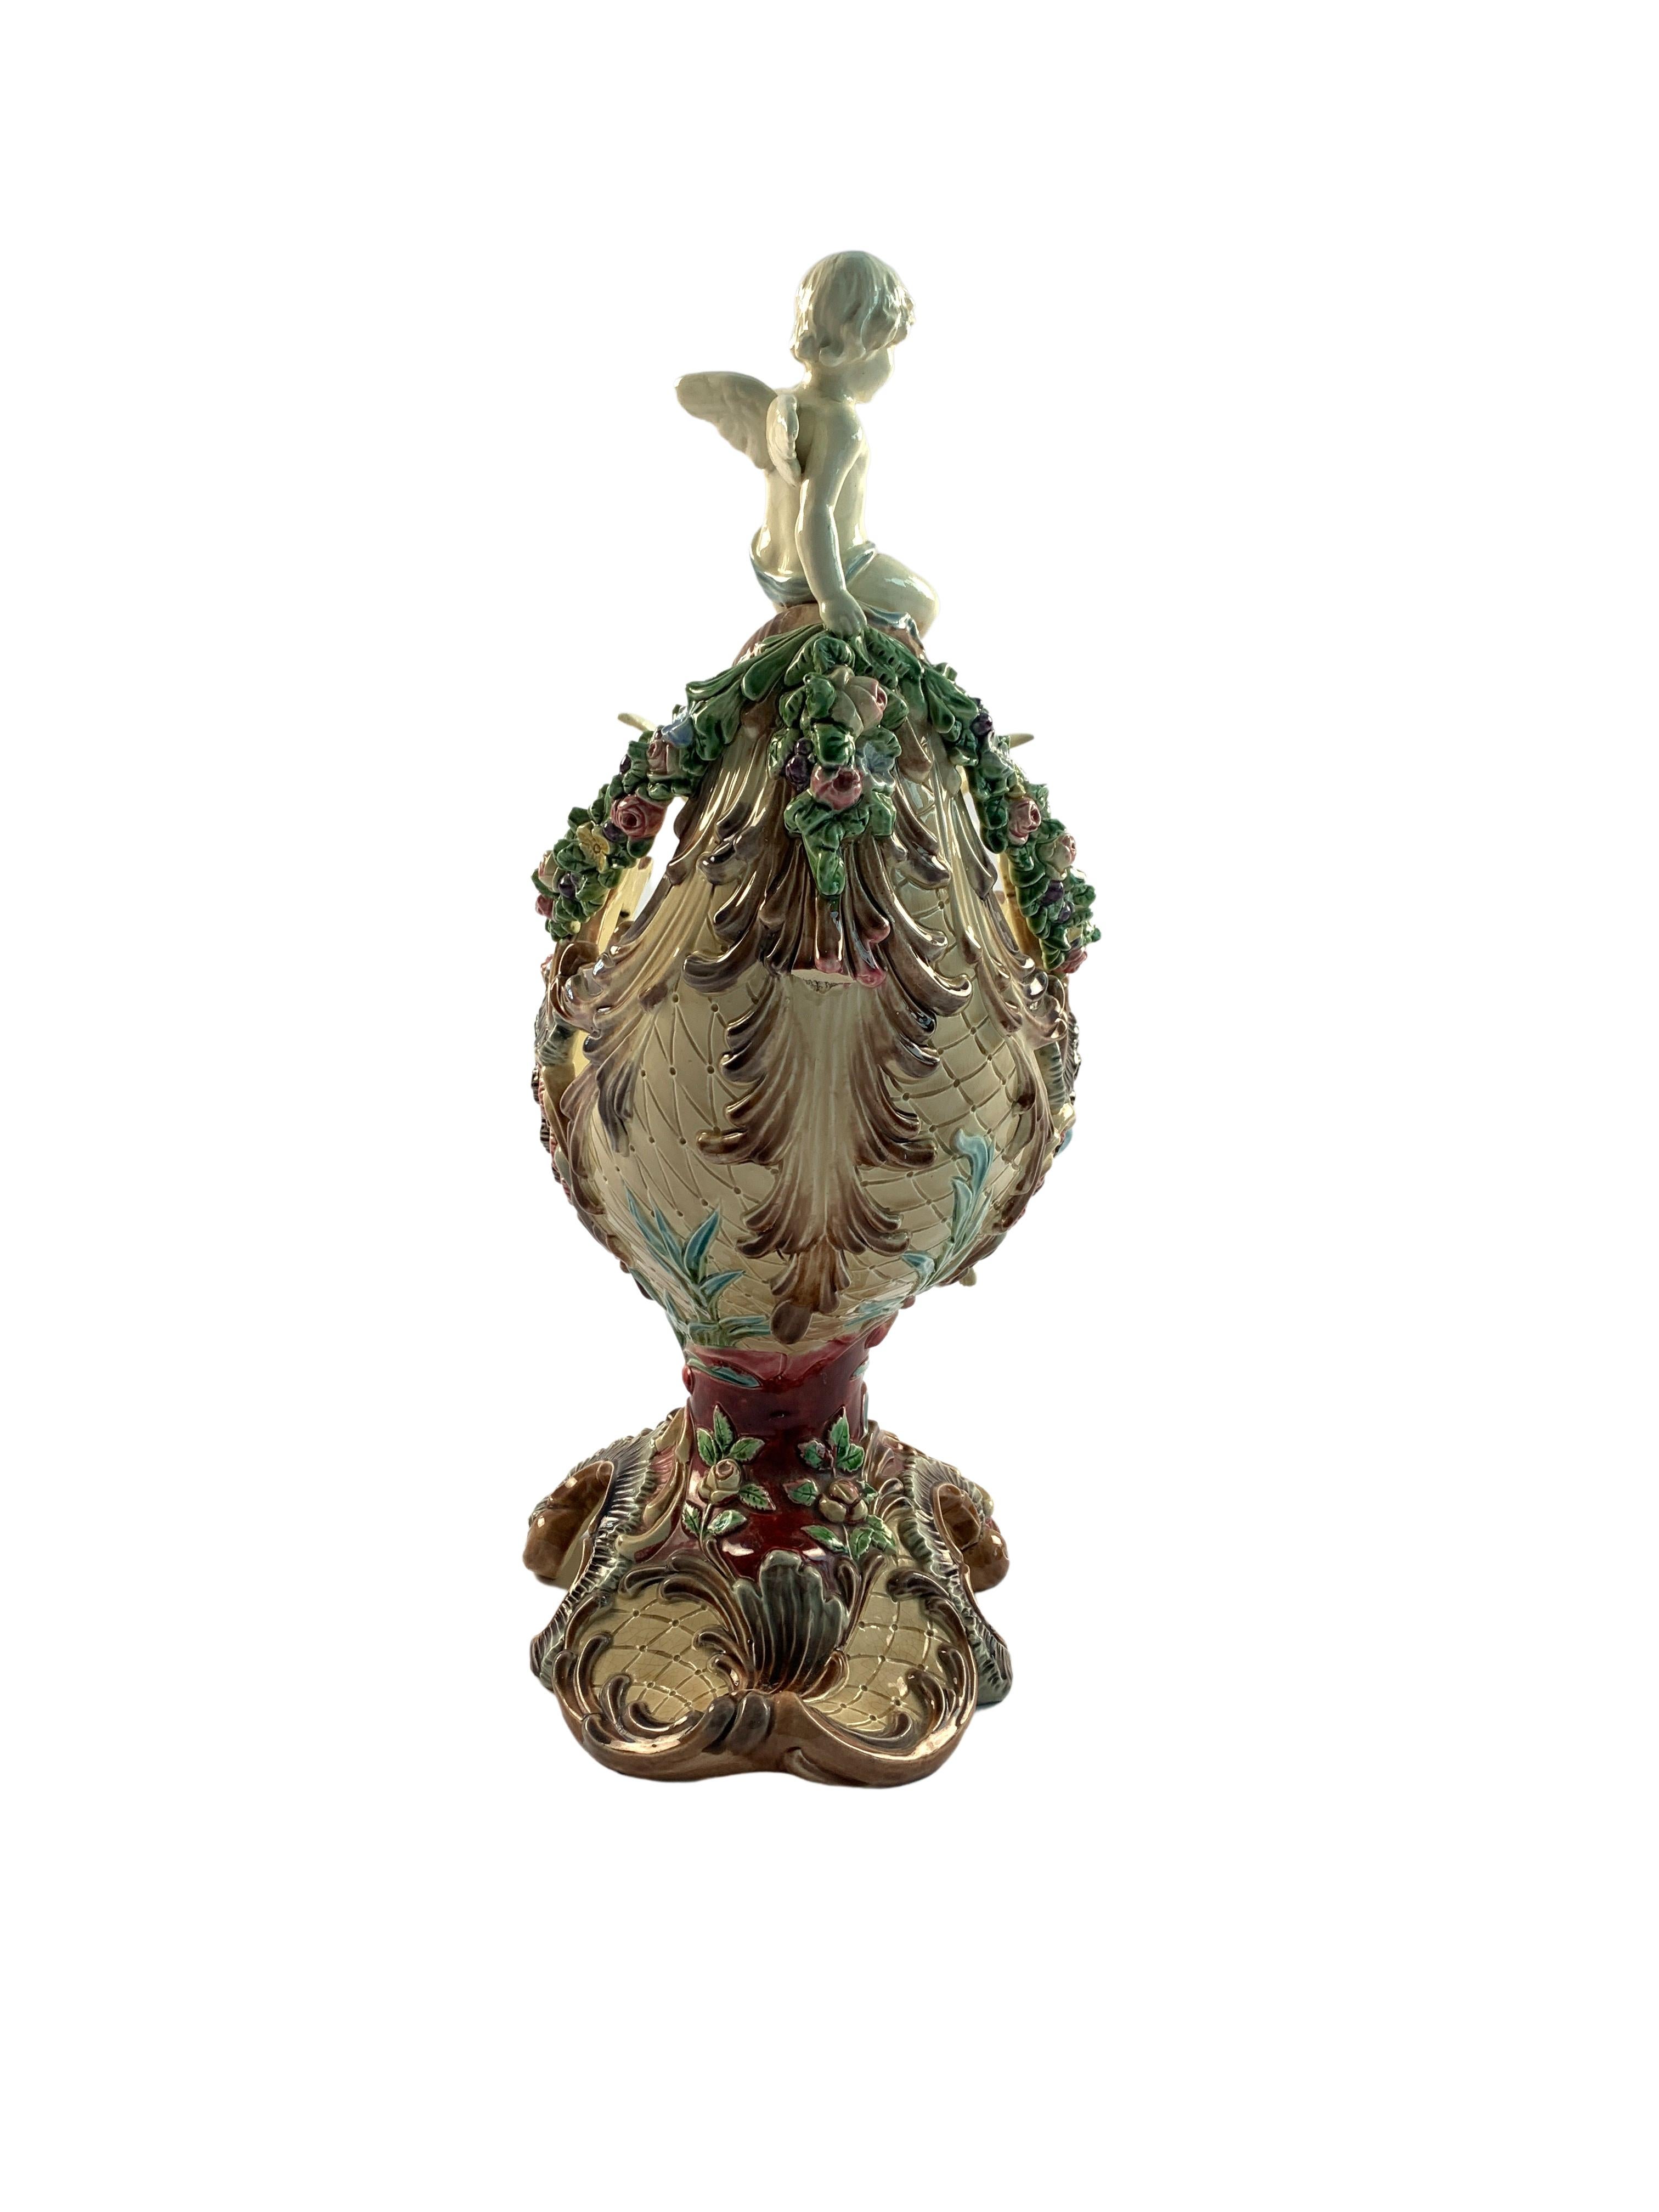 Majolica centrepiece in form of nautilus shell garlanded with flowers and pulled by winged horse and robed maiden, Cupid figure seated on stern, in the style of Dressler, Schiller and Fischer Budapest, imprinted four-digit number underneath